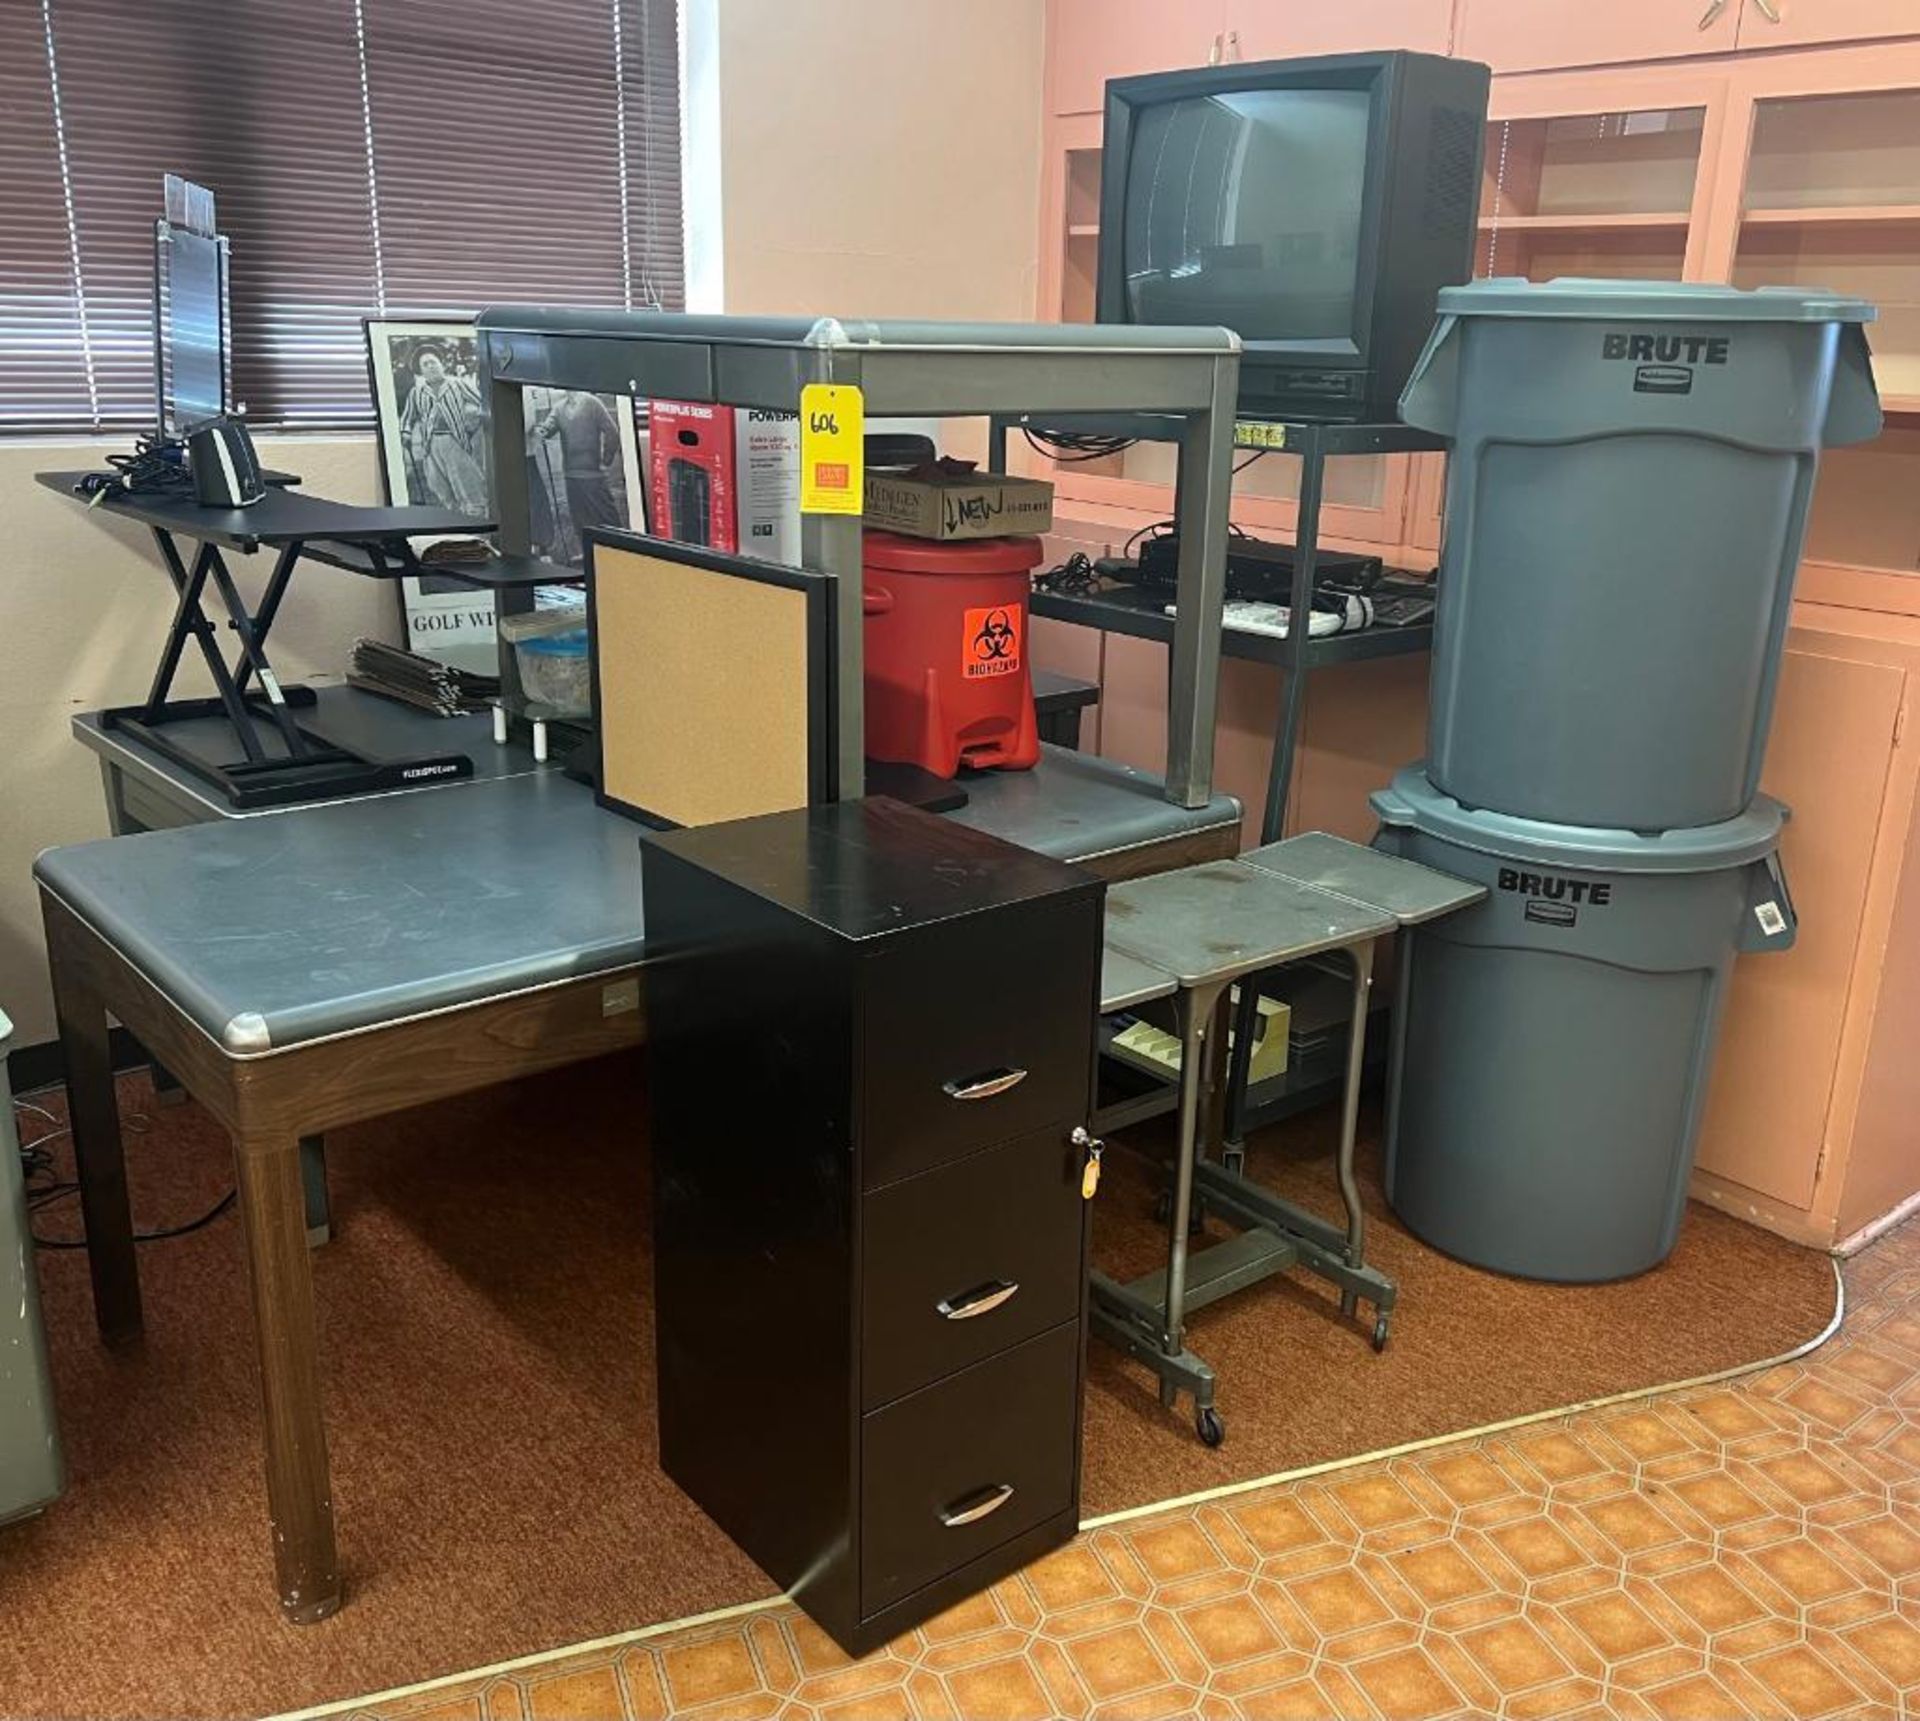 (4) Tables, Computer Monitor, Air Purifier, (2) Trash Containers, TV with VCR and Stand, Filing Cabi